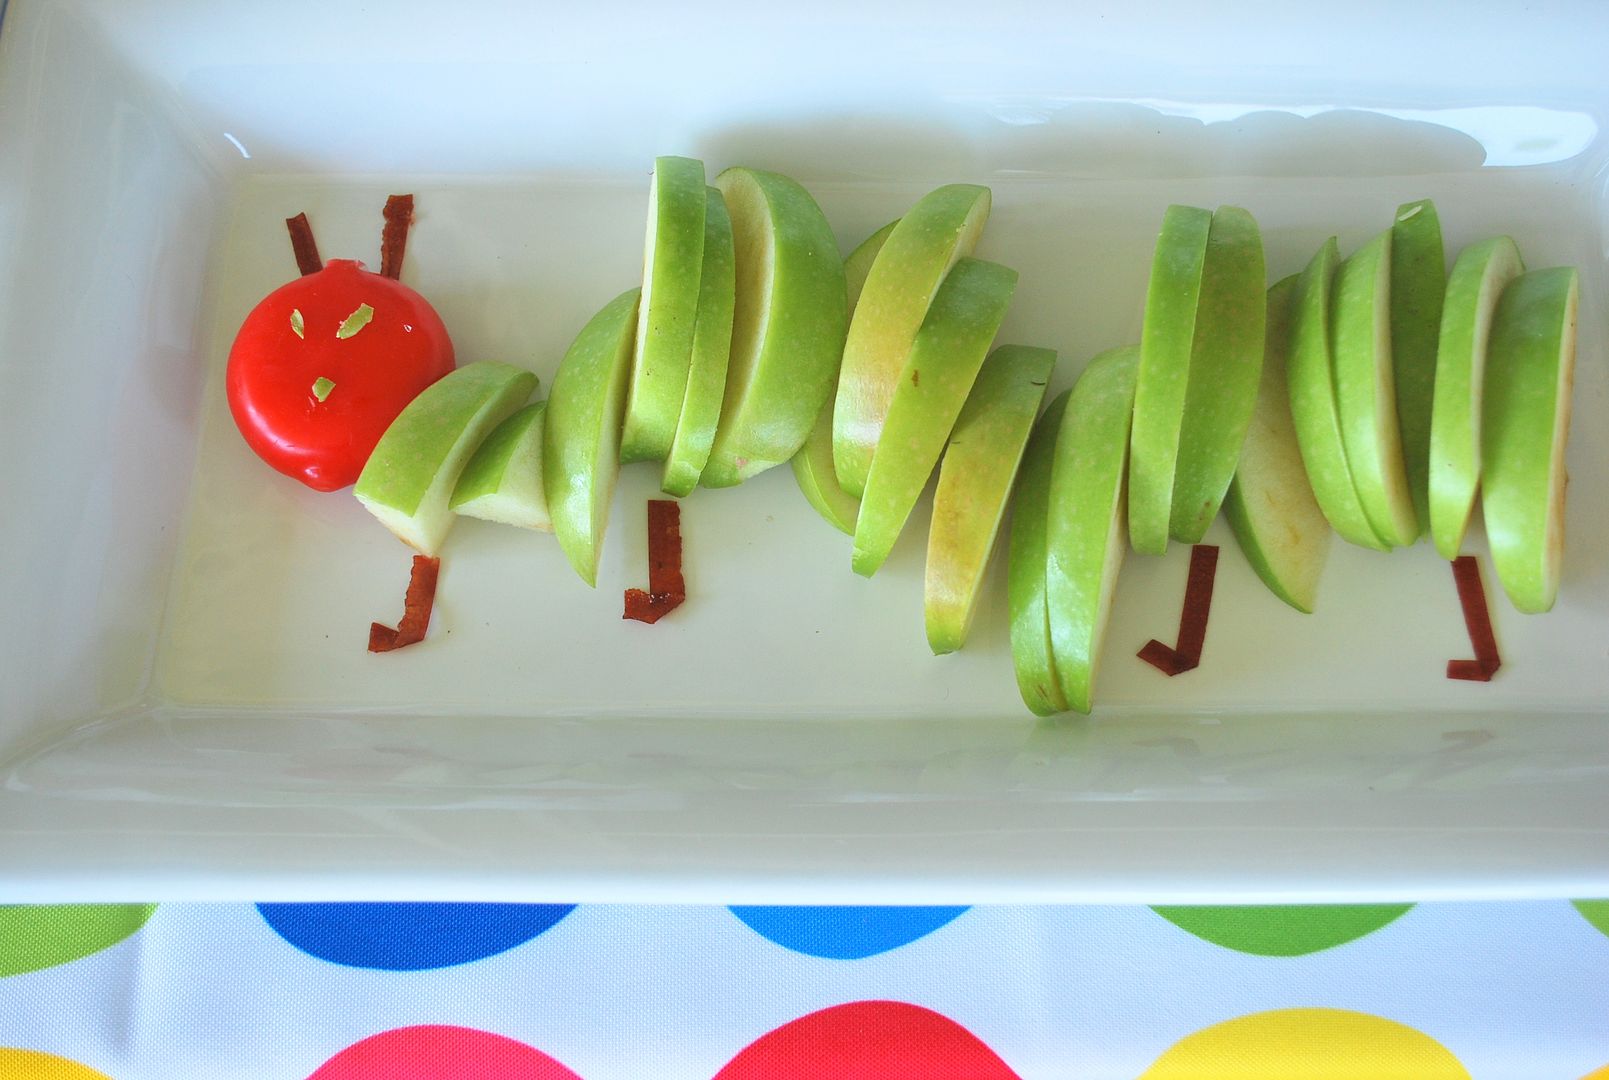 Very Hungry Caterpillar party snack idea via Home Deco 50. How clever!